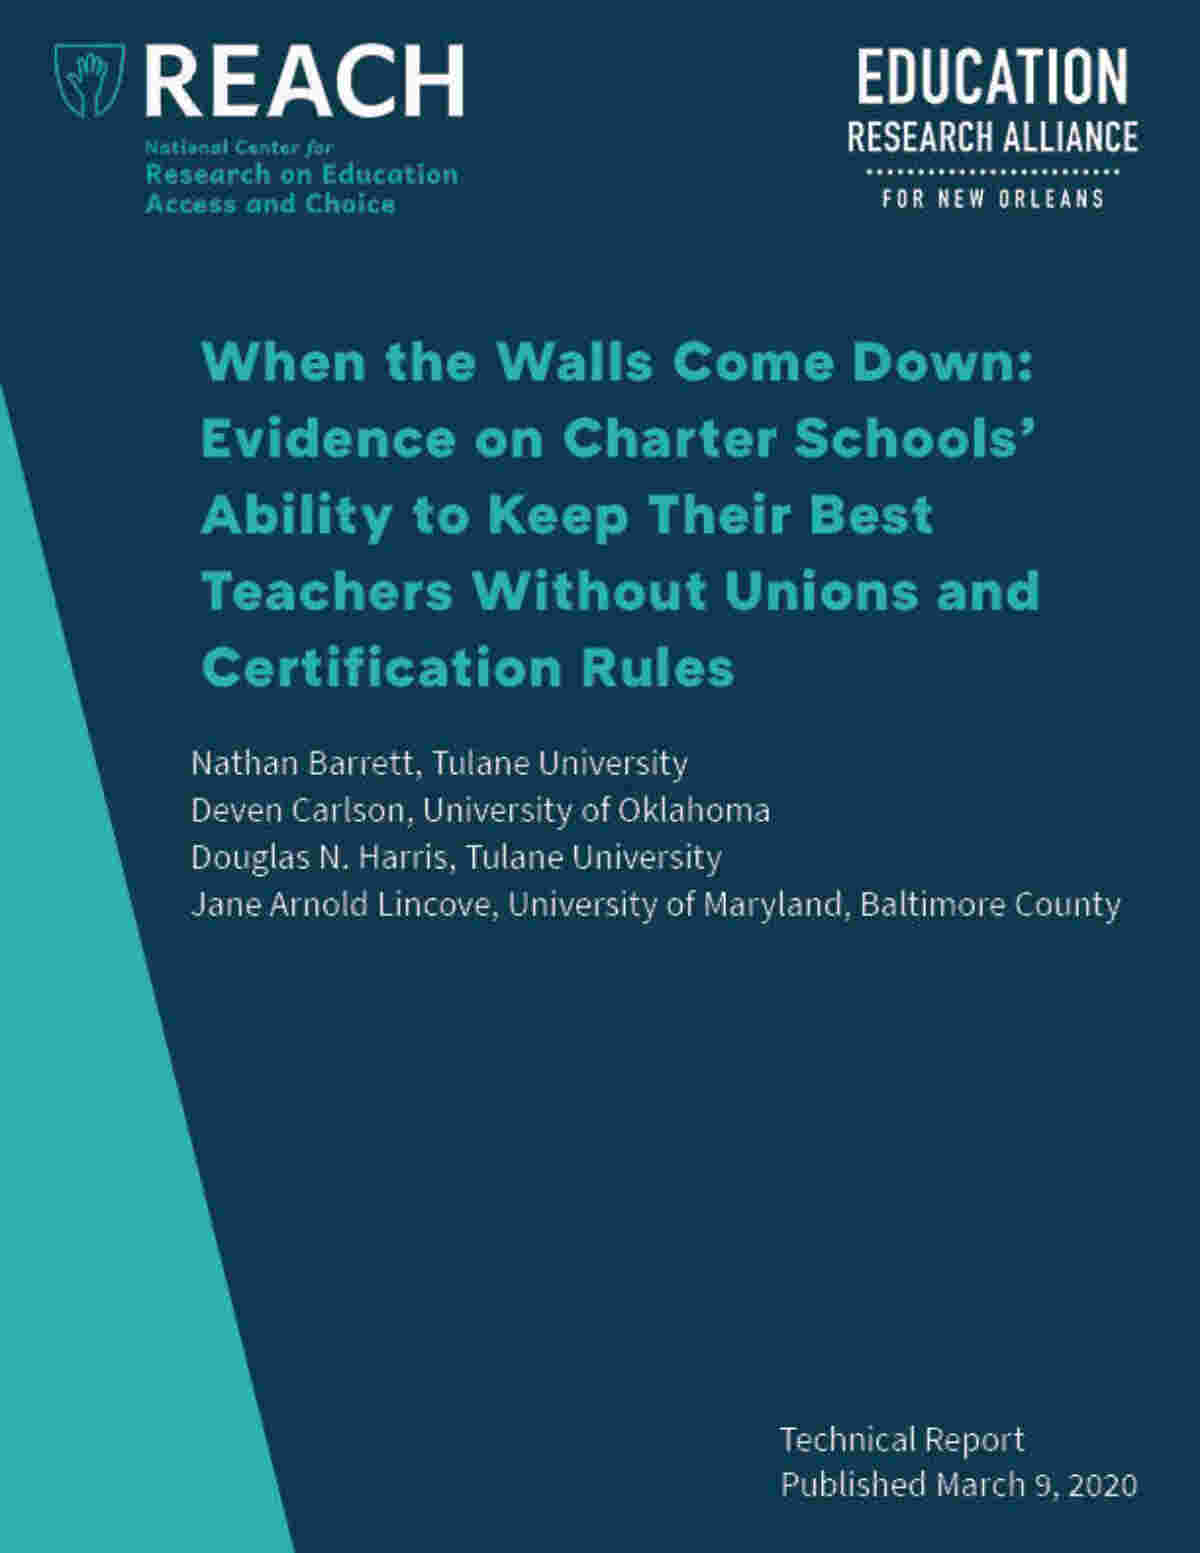 Cover of the REACH technical report on retention and rewards for teachers in New Orleans